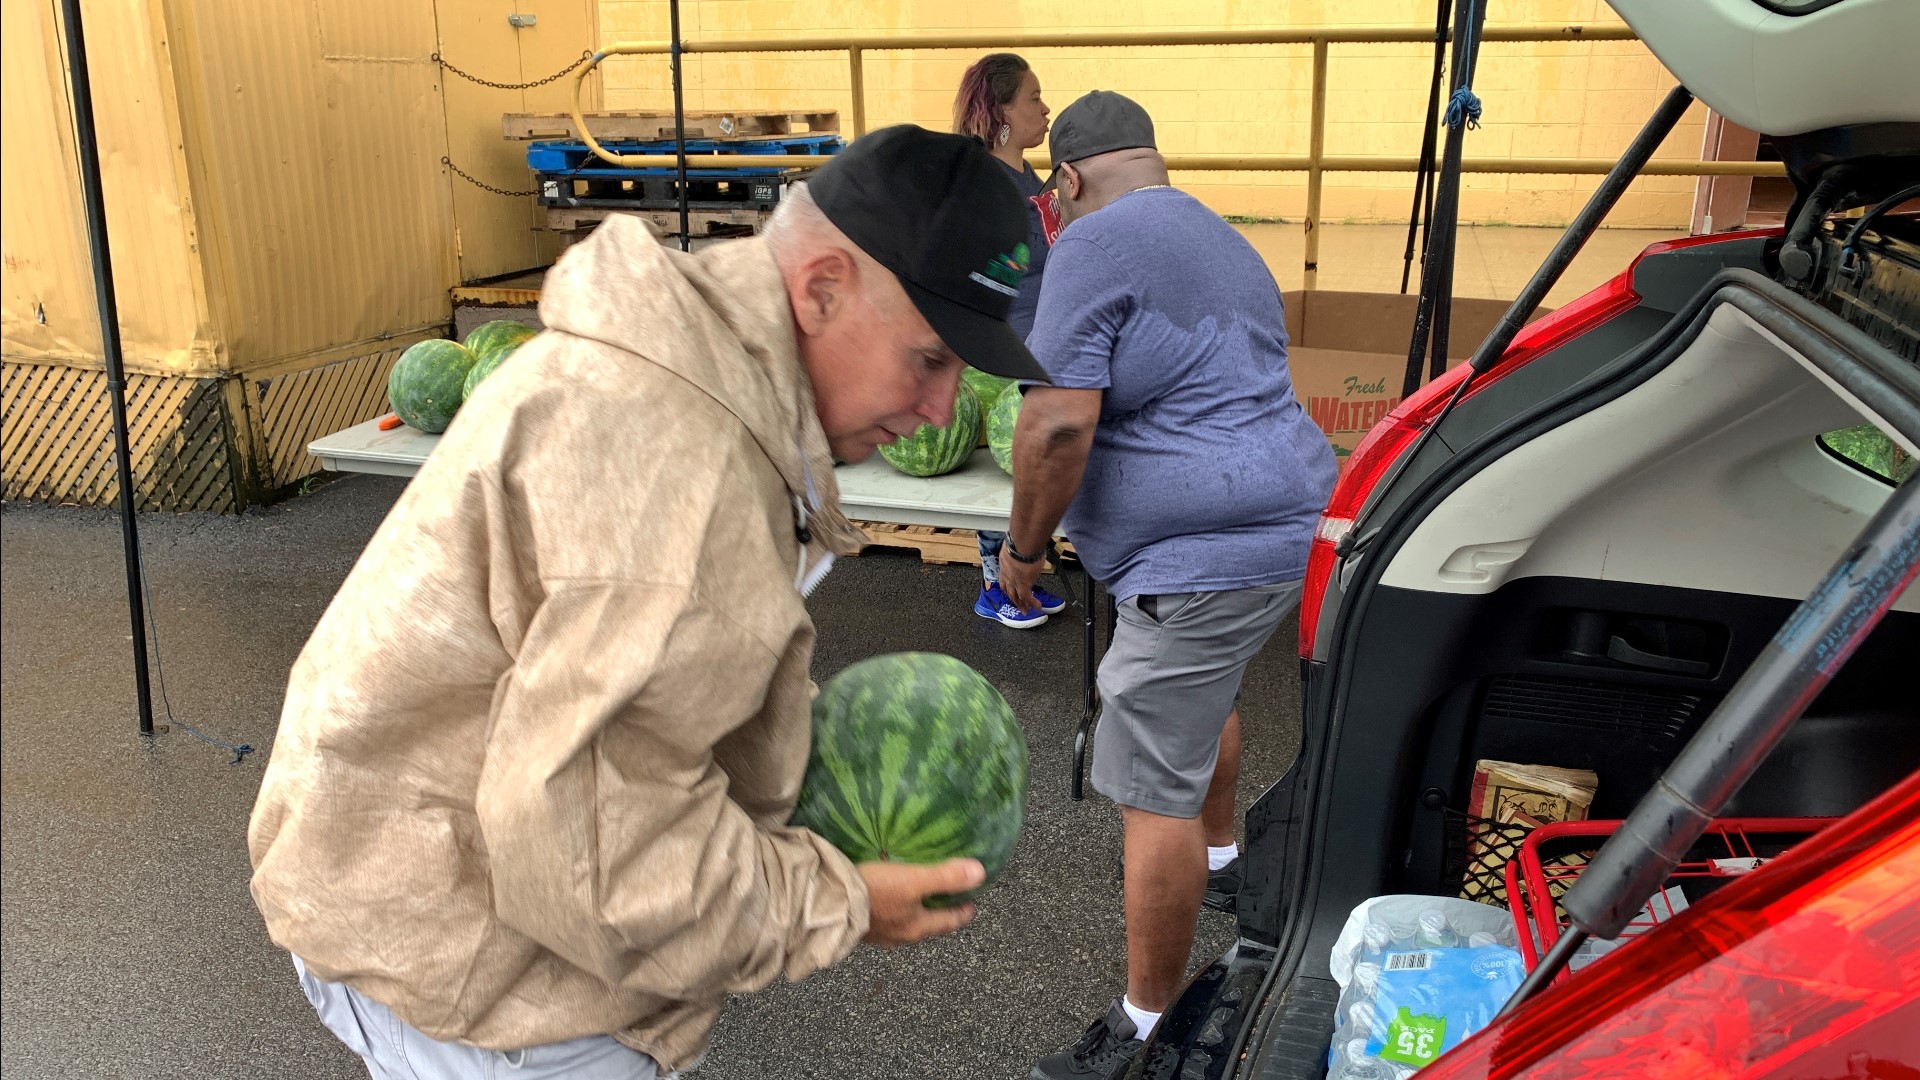 A produce company provided the melons to raise awareness and donations for Scranton's Salvation Army.